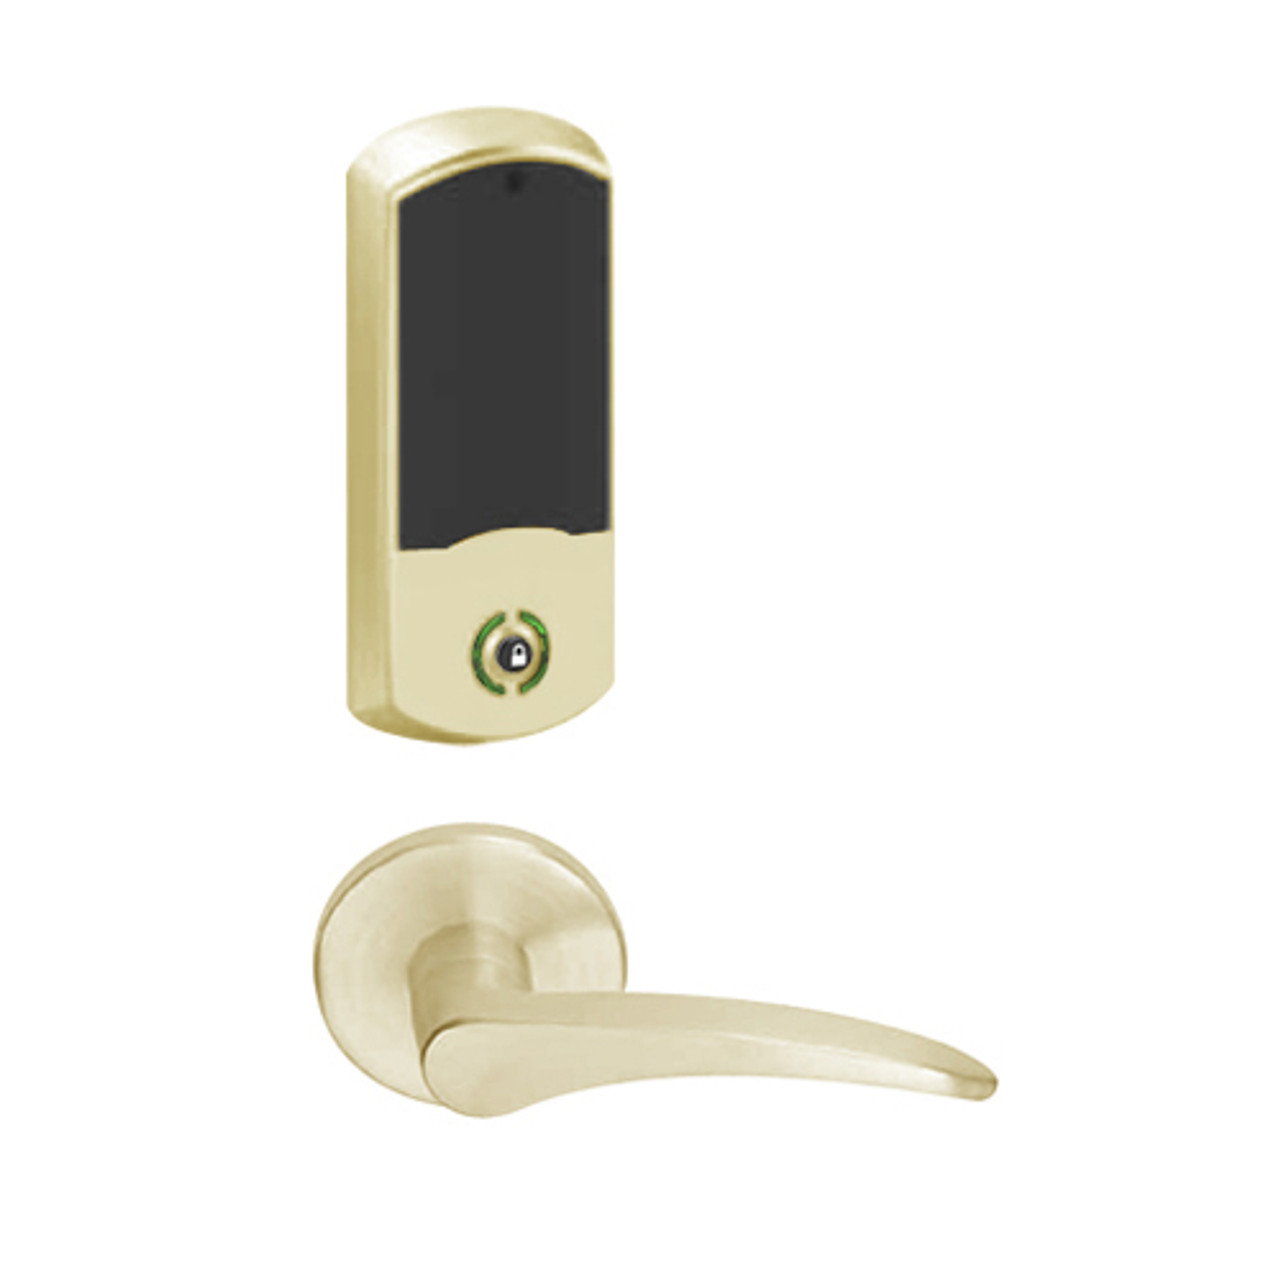 LEMB-GRW-J-12-606-00A-RH Schlage Privacy/Office Wireless Greenwich Mortise Lock with Push Button & LED Indicator and 12 Lever Prepped for FSIC in Satin Brass